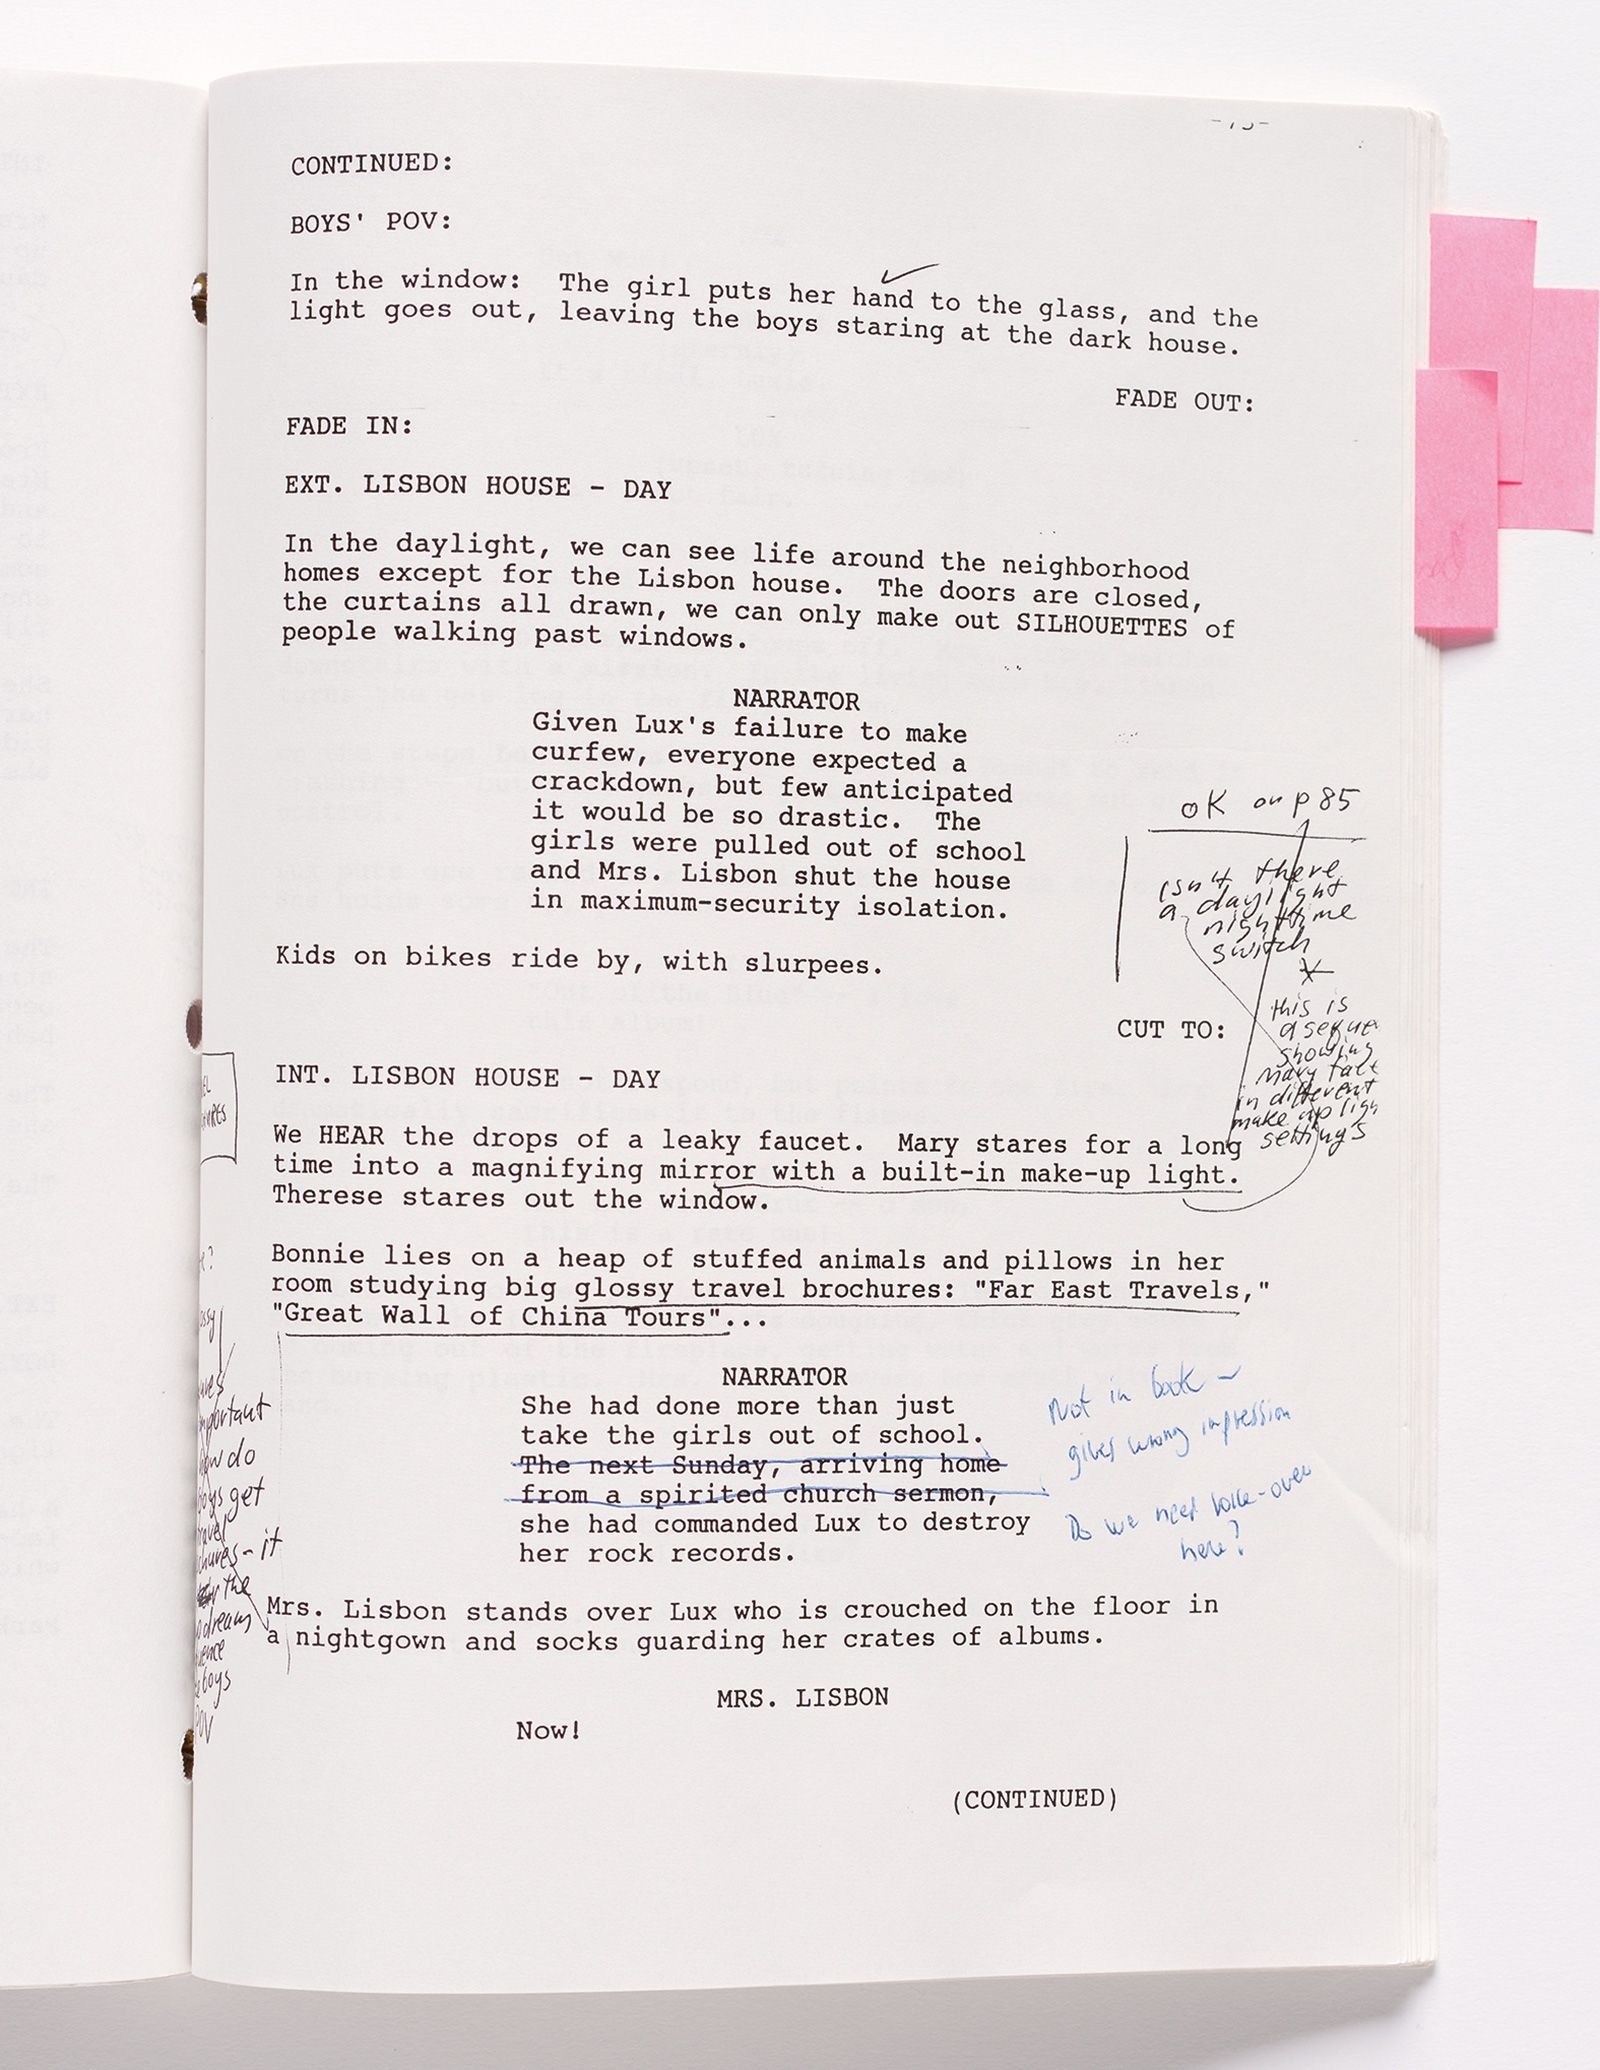 A copy of a marked-up script from "The Virgin Suicides."